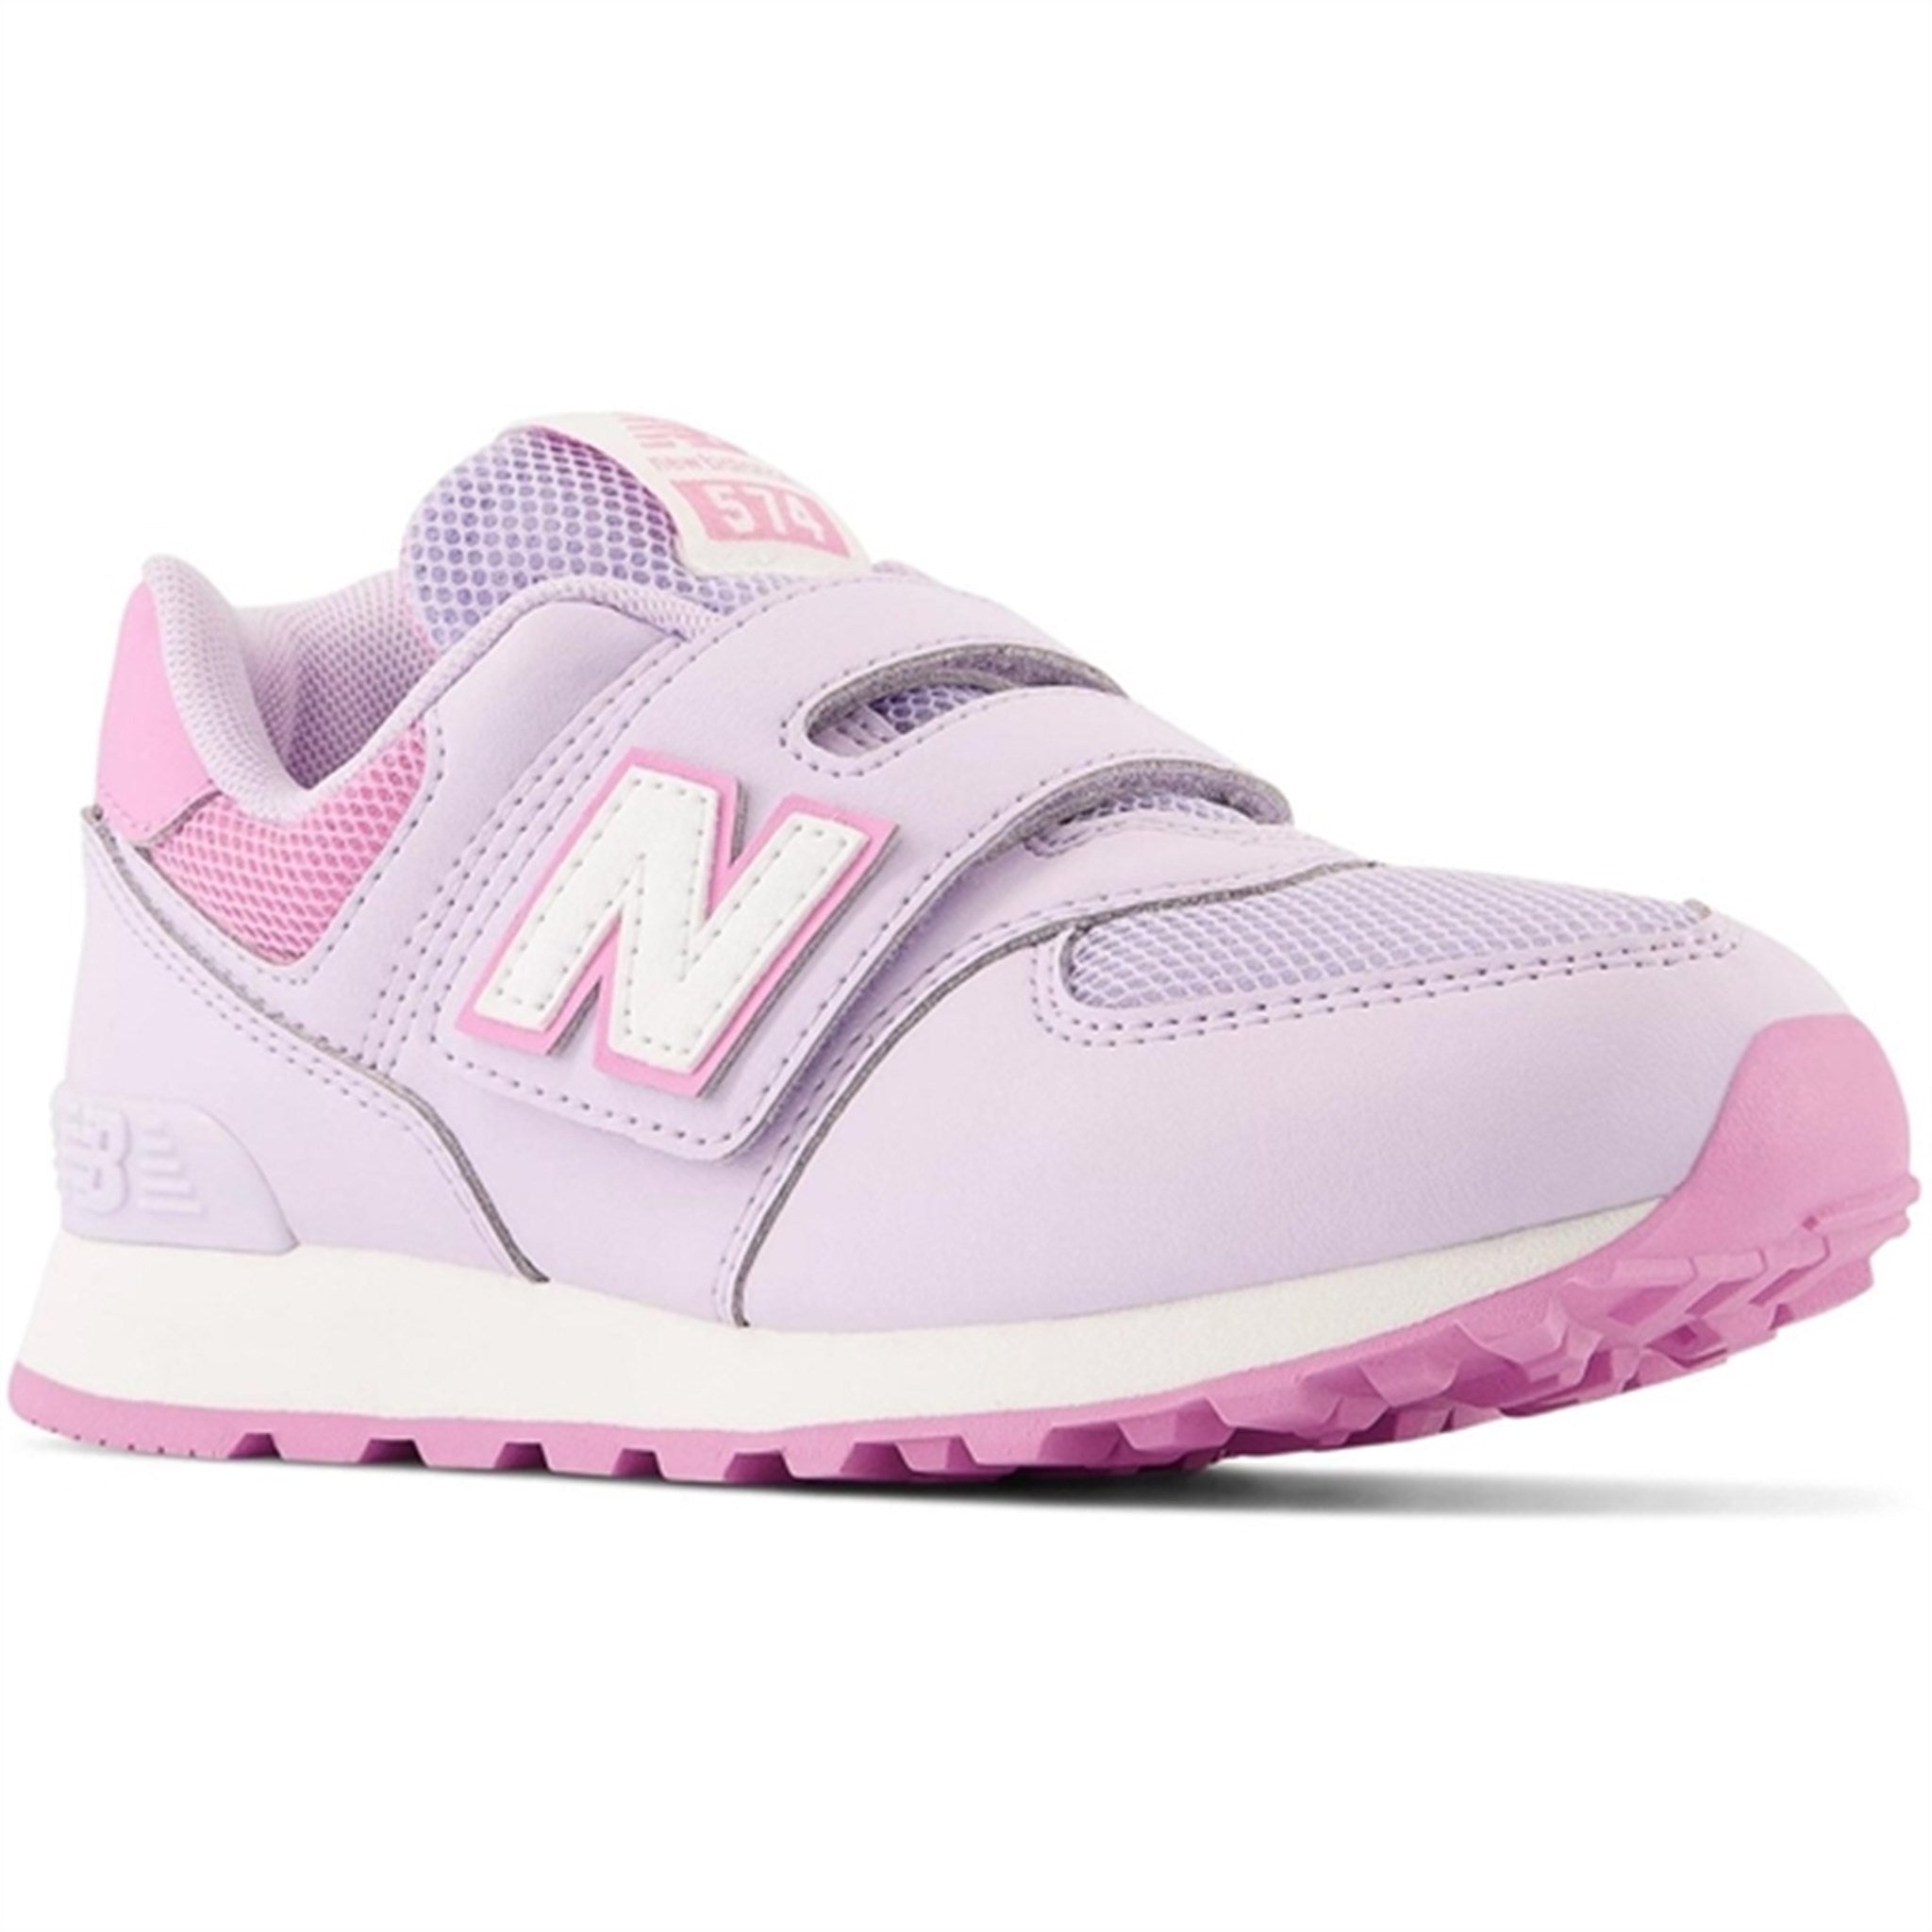 New Balance 574 Bright Lavender Sneakers